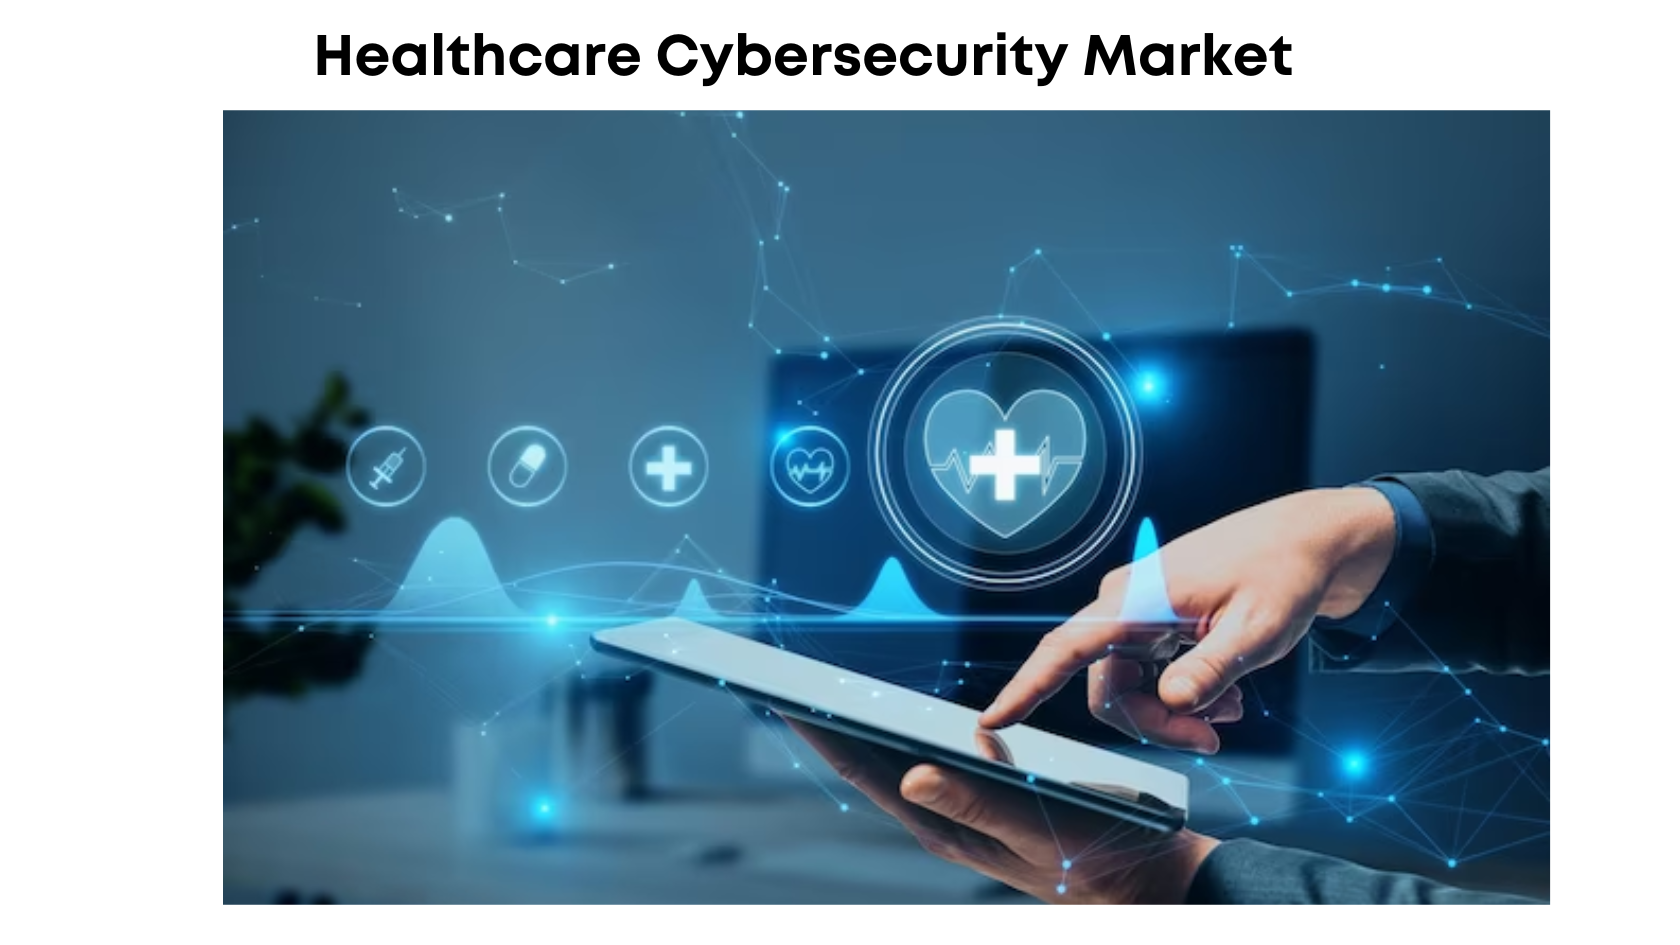 The Healthcare Cybersecurity Market is projected to reach USD 93.6 Billion by 2032